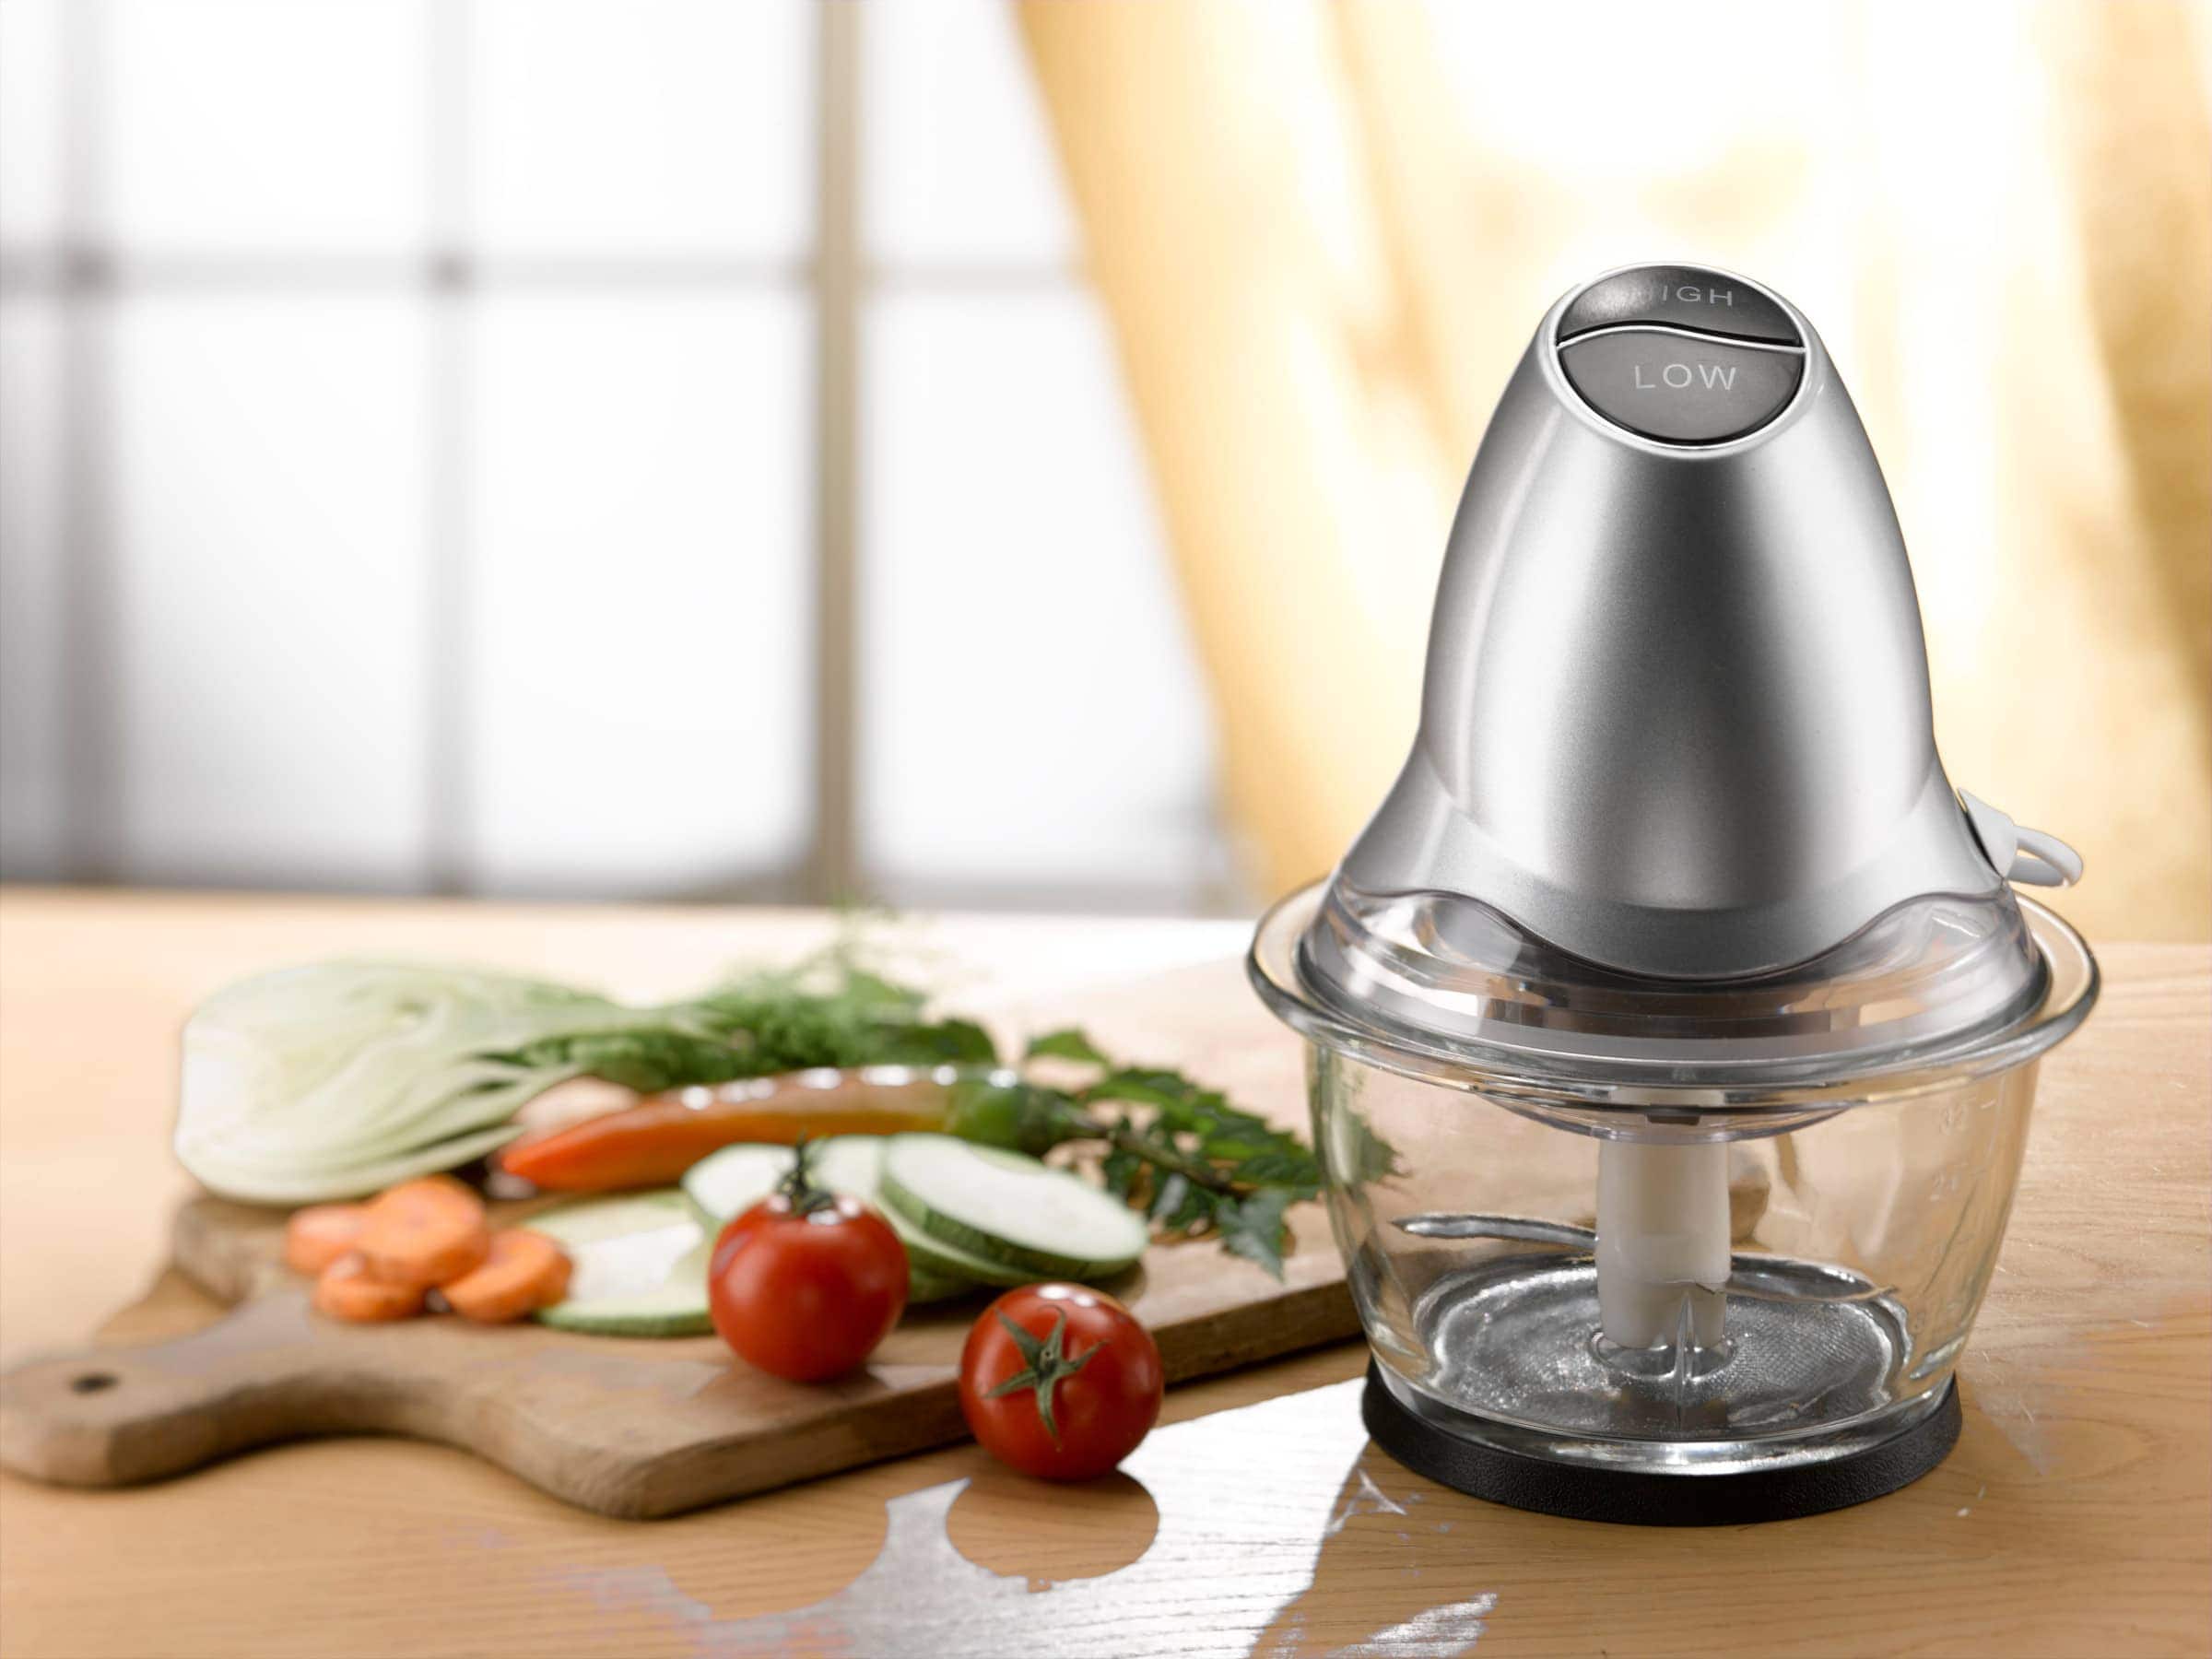 Perfect Onion Vegetable Chopper For Your Kitchen 